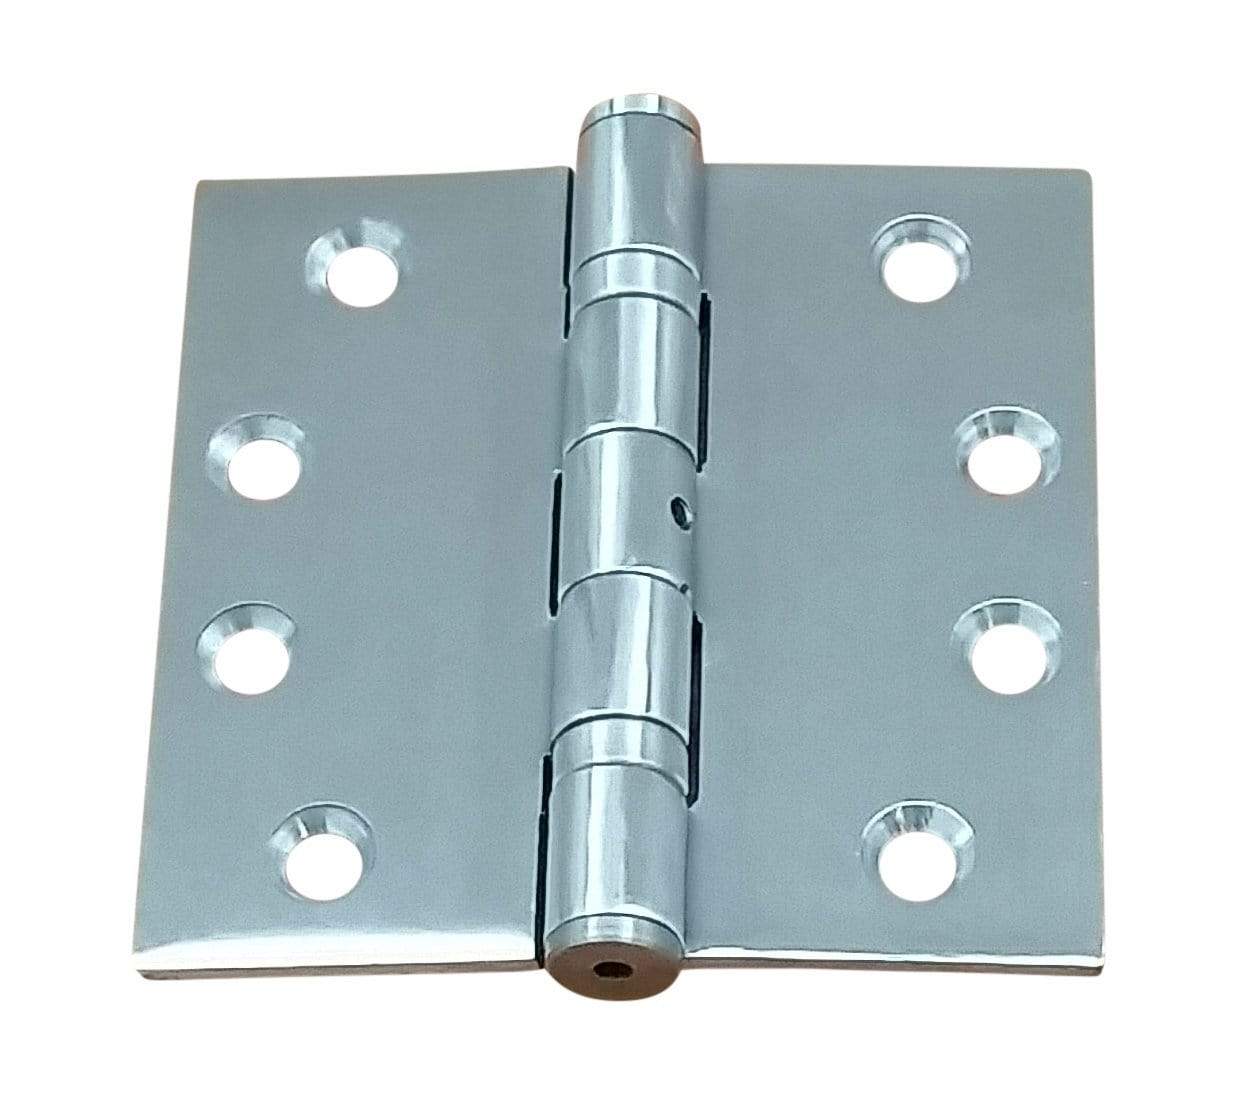 Commercial Ball Bearing Hinges 4 1/2" Square - Multiple Finishes Available - 2 Pack